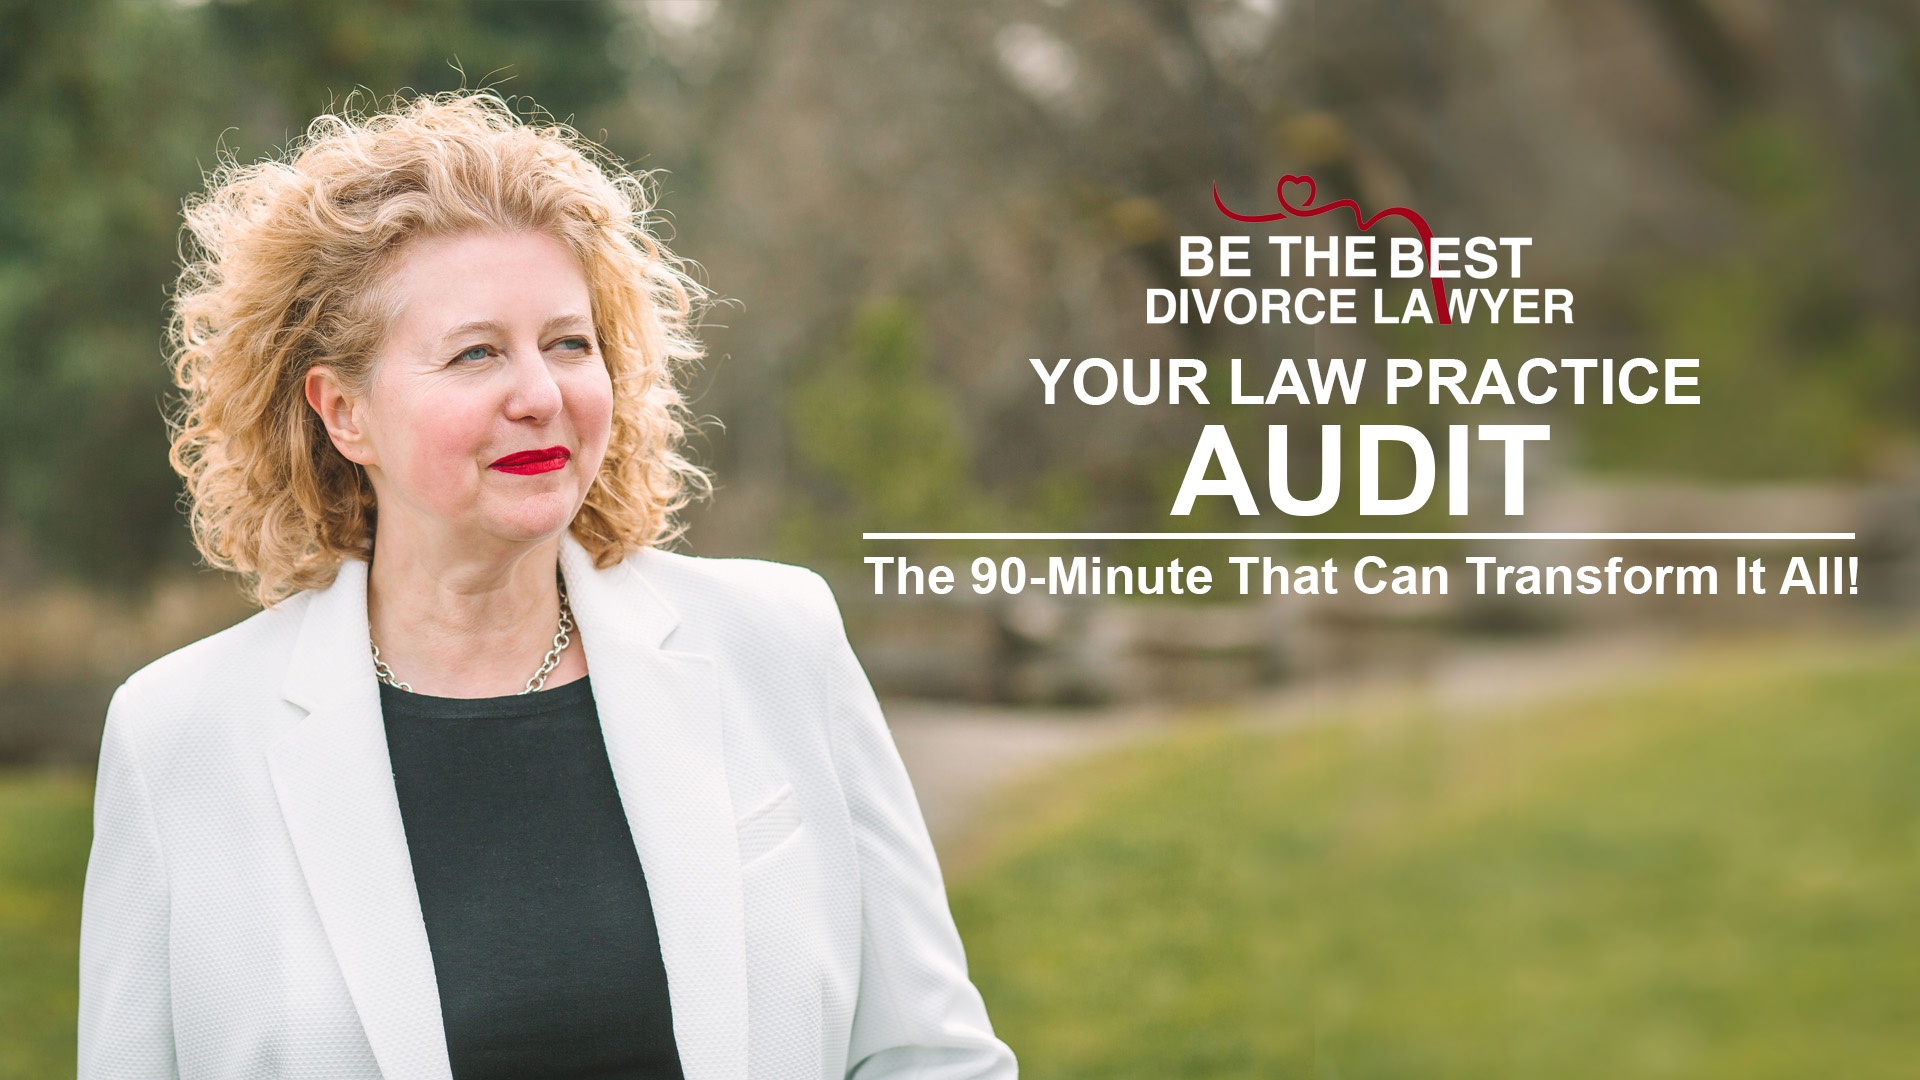 Val Hemminger Can Help You Strategize With a Law Practice Audit